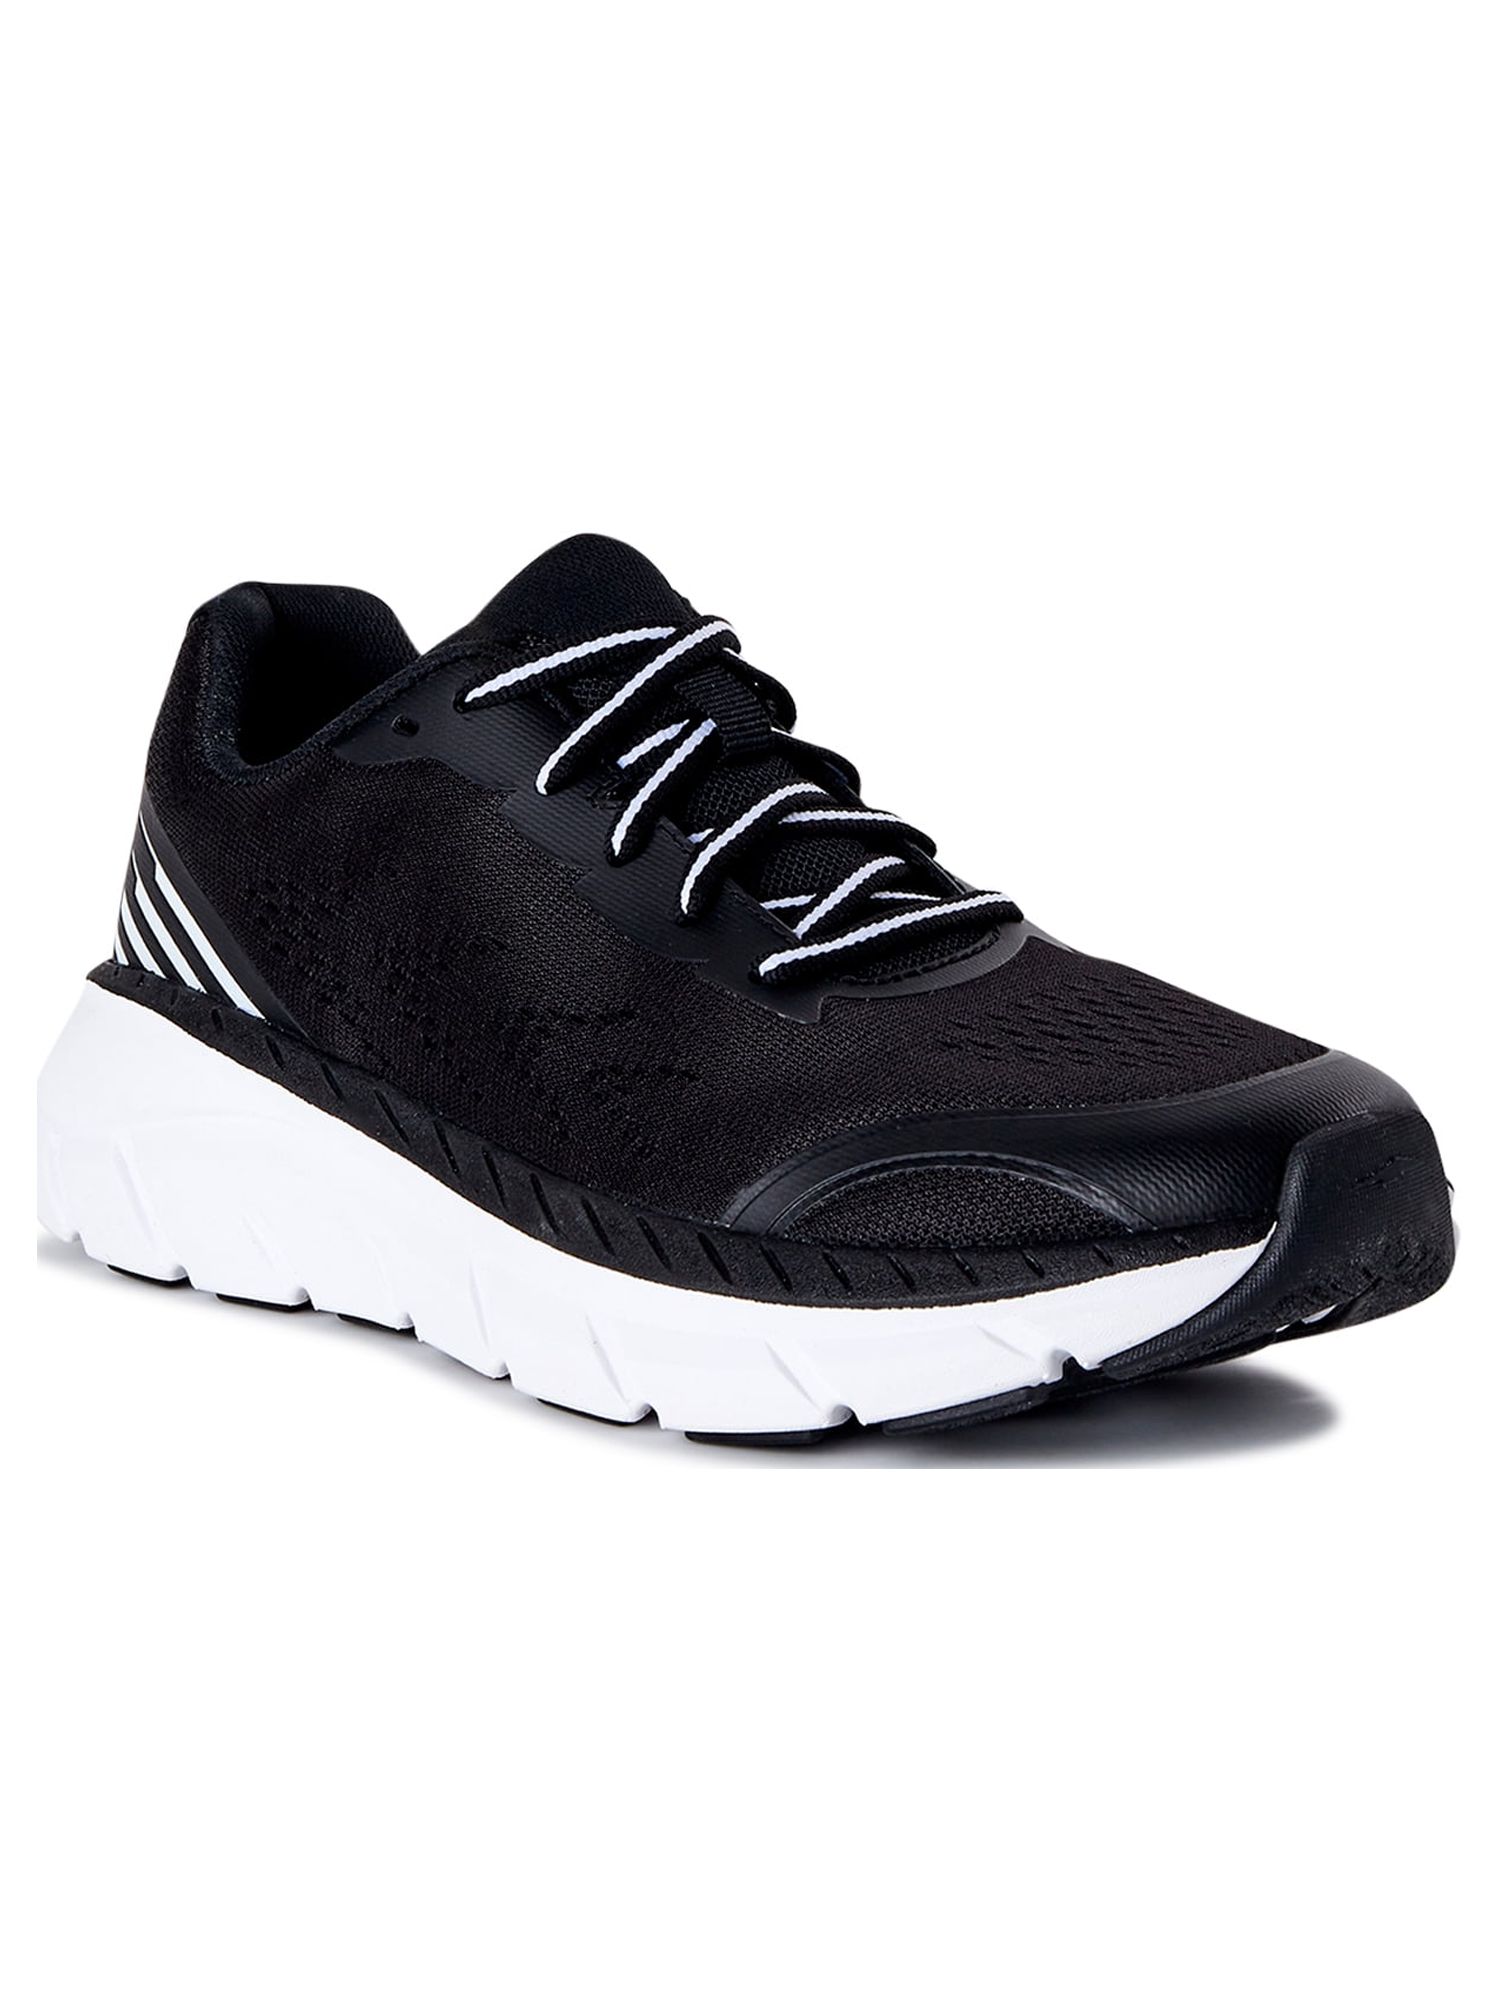 Avia Women's Hightail Athletic Sneakers, Wide Width Available - image 1 of 6